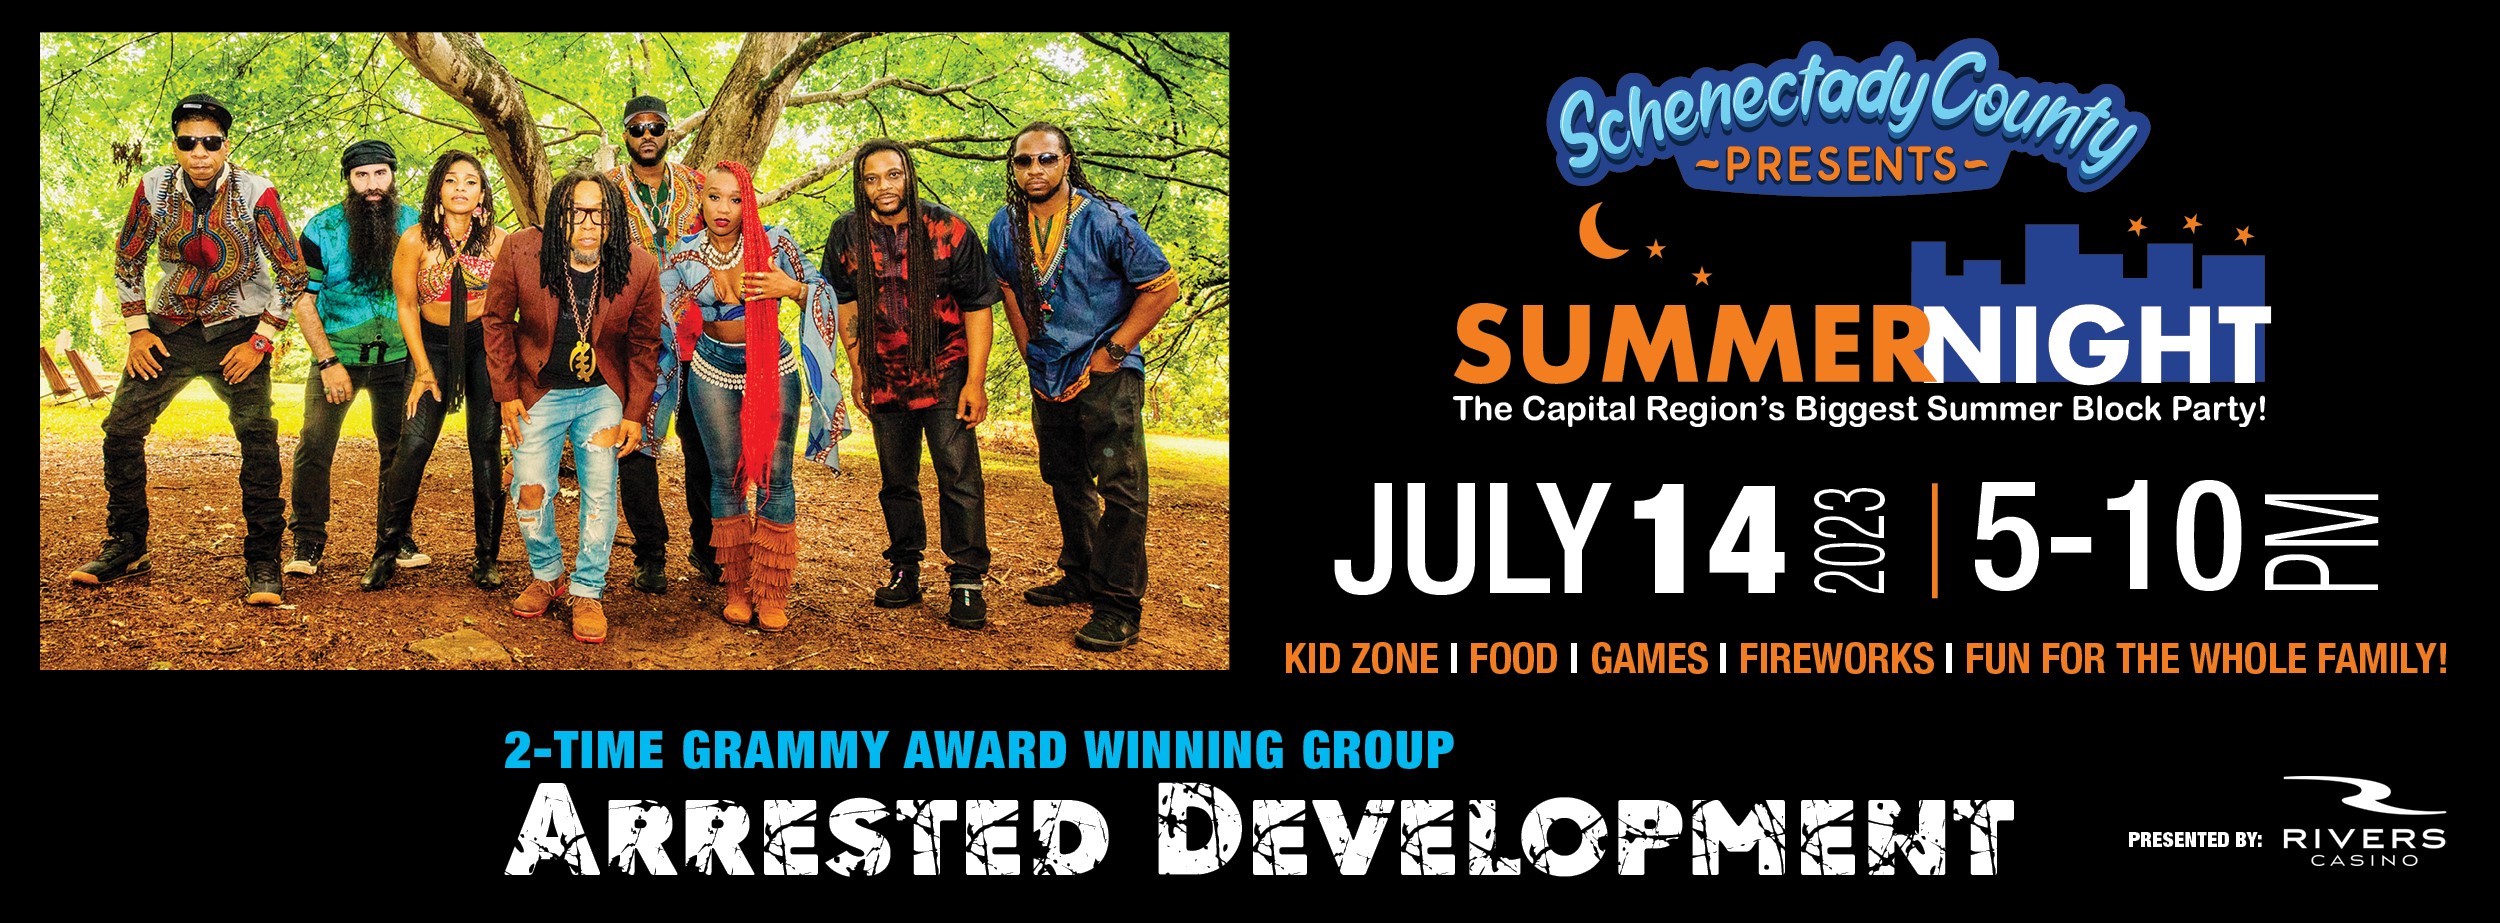 web banner announcing the headlining act at SummerNight 23. Includes photo of Arrested Development